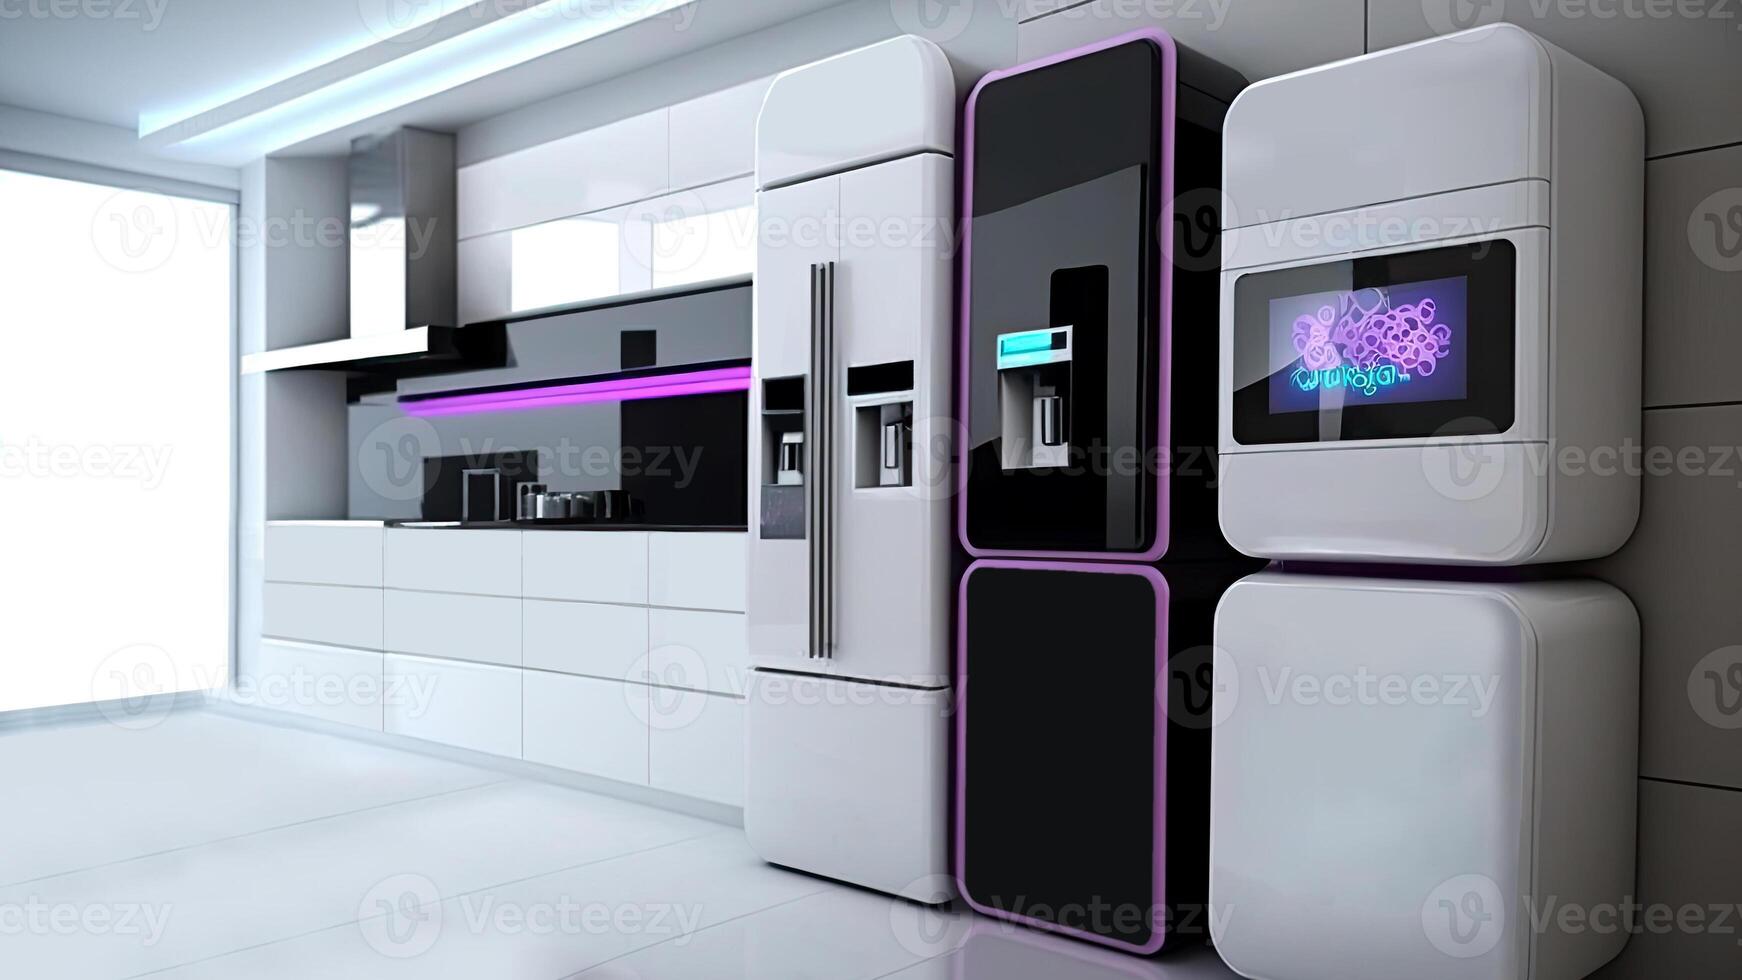 Kitchen with smart appliances with display screen and a smart oven with voice-controlled settings, concept of Smart Home and Artificial Intelligence, created with technology photo